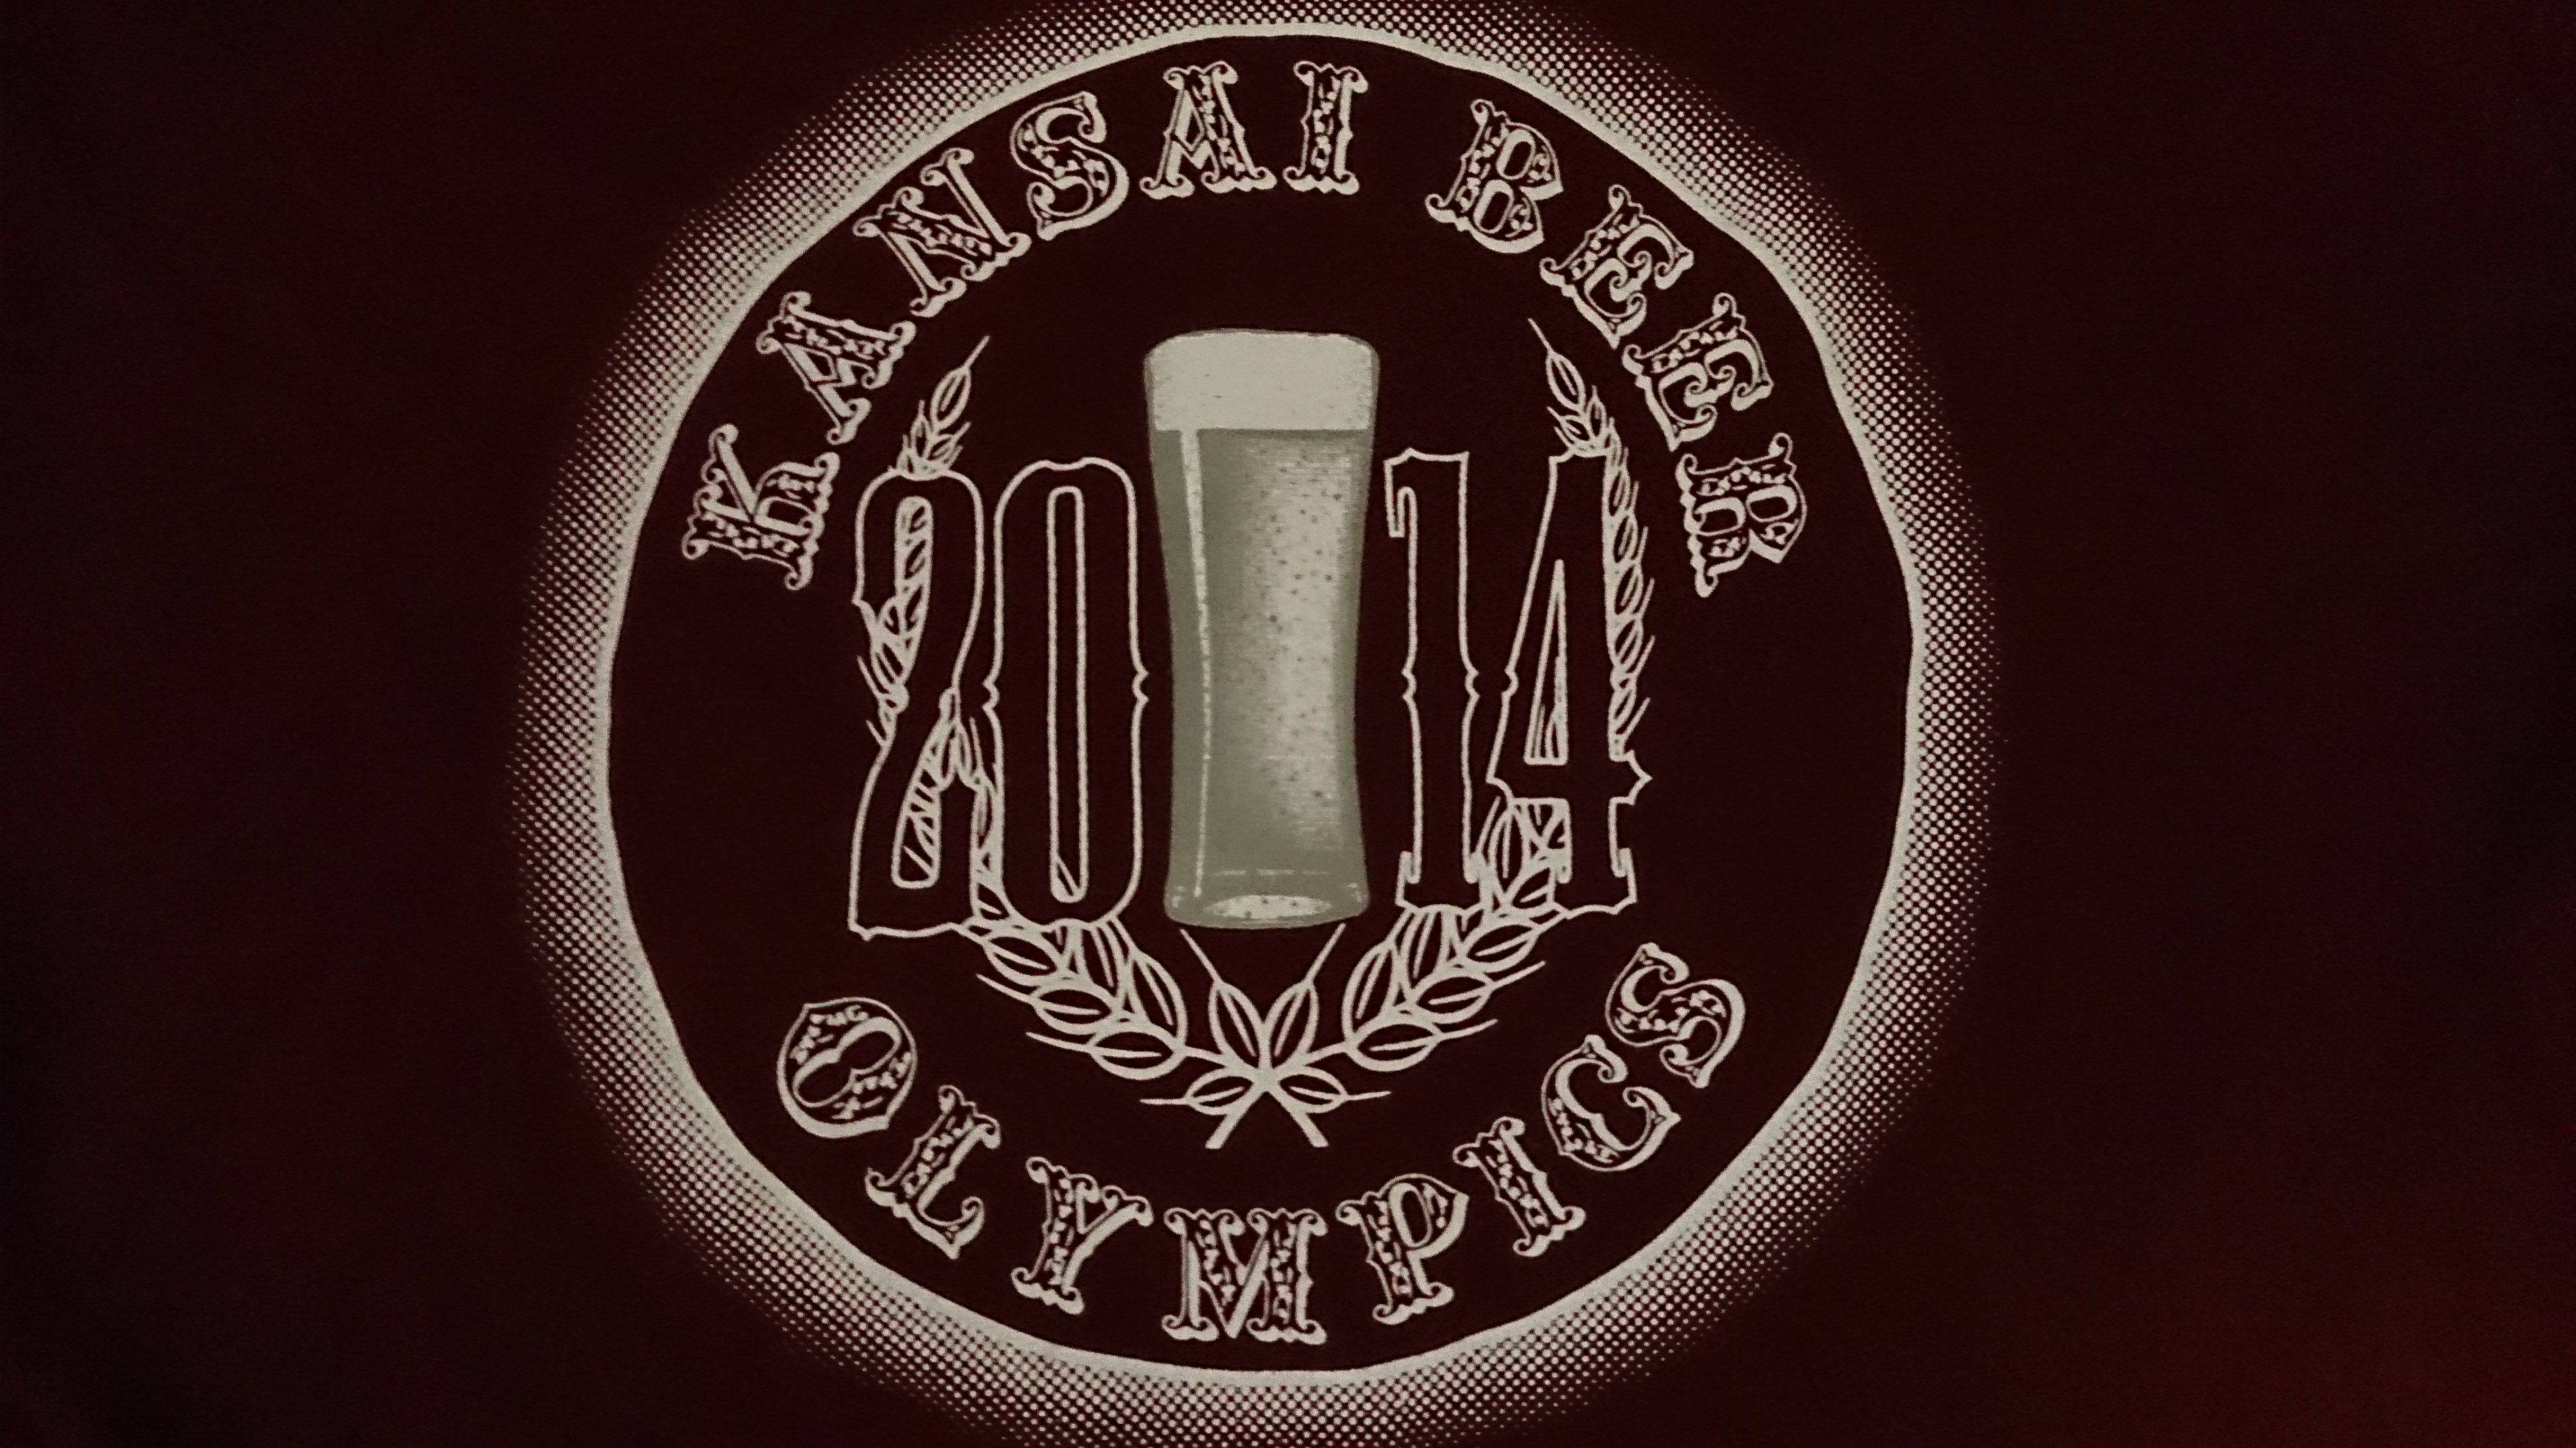 Going for Gold: 2014 Kansai Beer Olympics